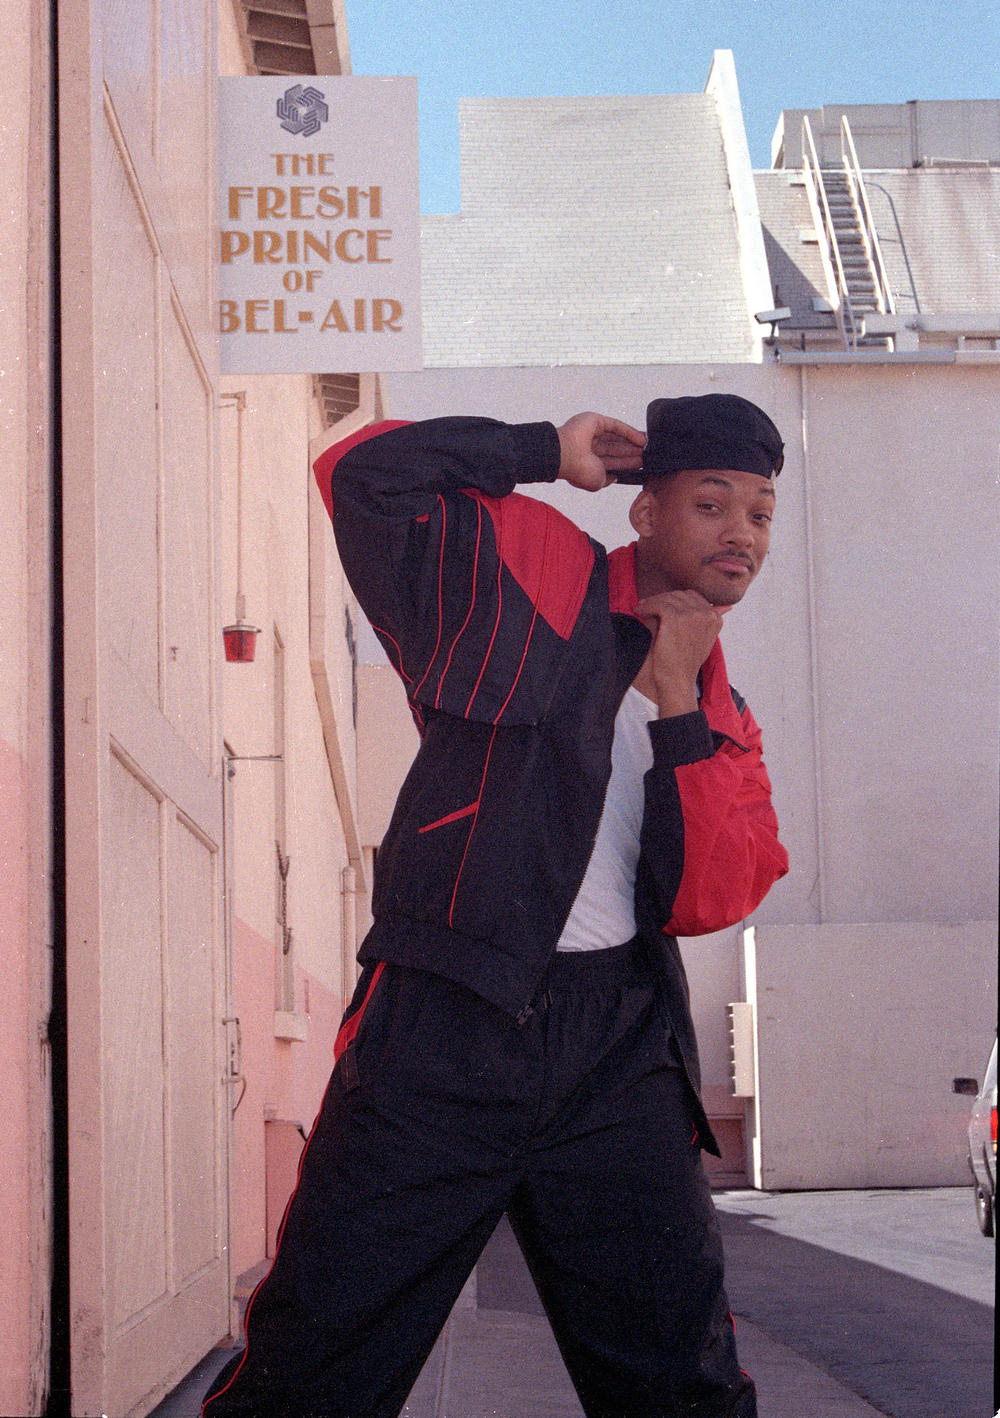 Actor and rap star Will Smith poses on the set of "The Fresh Prince of Bel-Air" in Los Angeles, Calif., on Oct. 15, 1990.